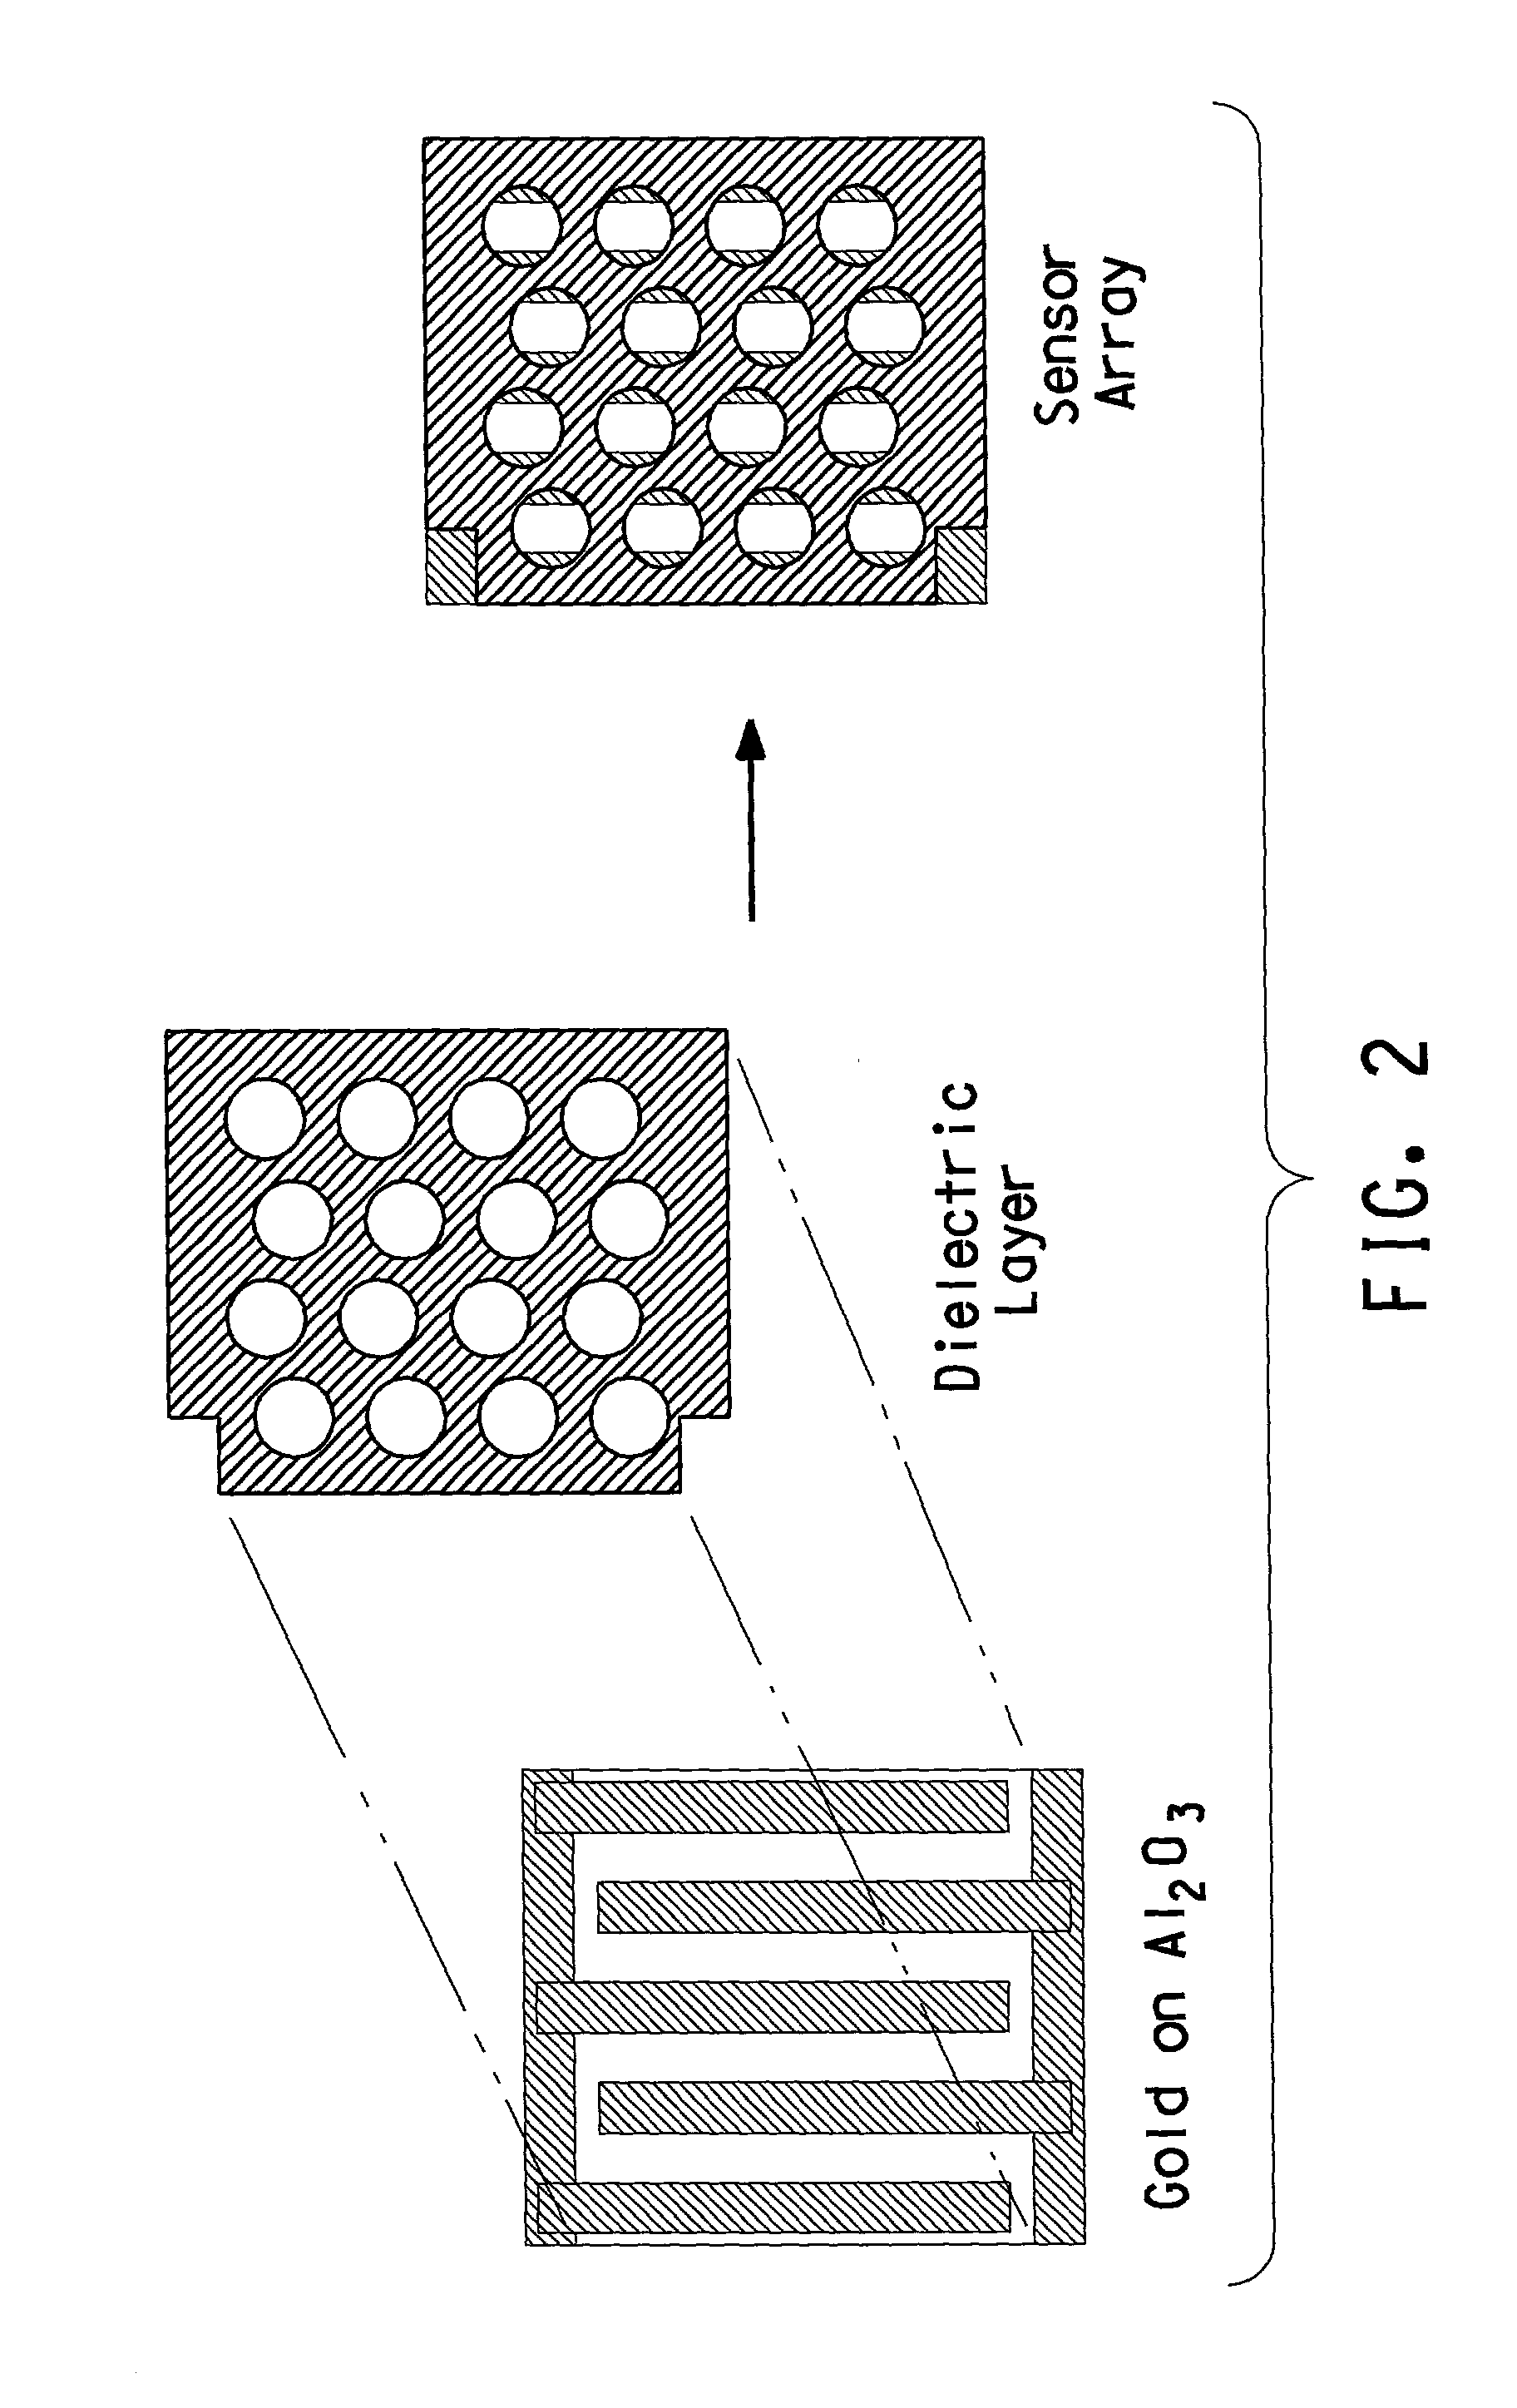 Method and apparatus for analyzing mixtures of gases